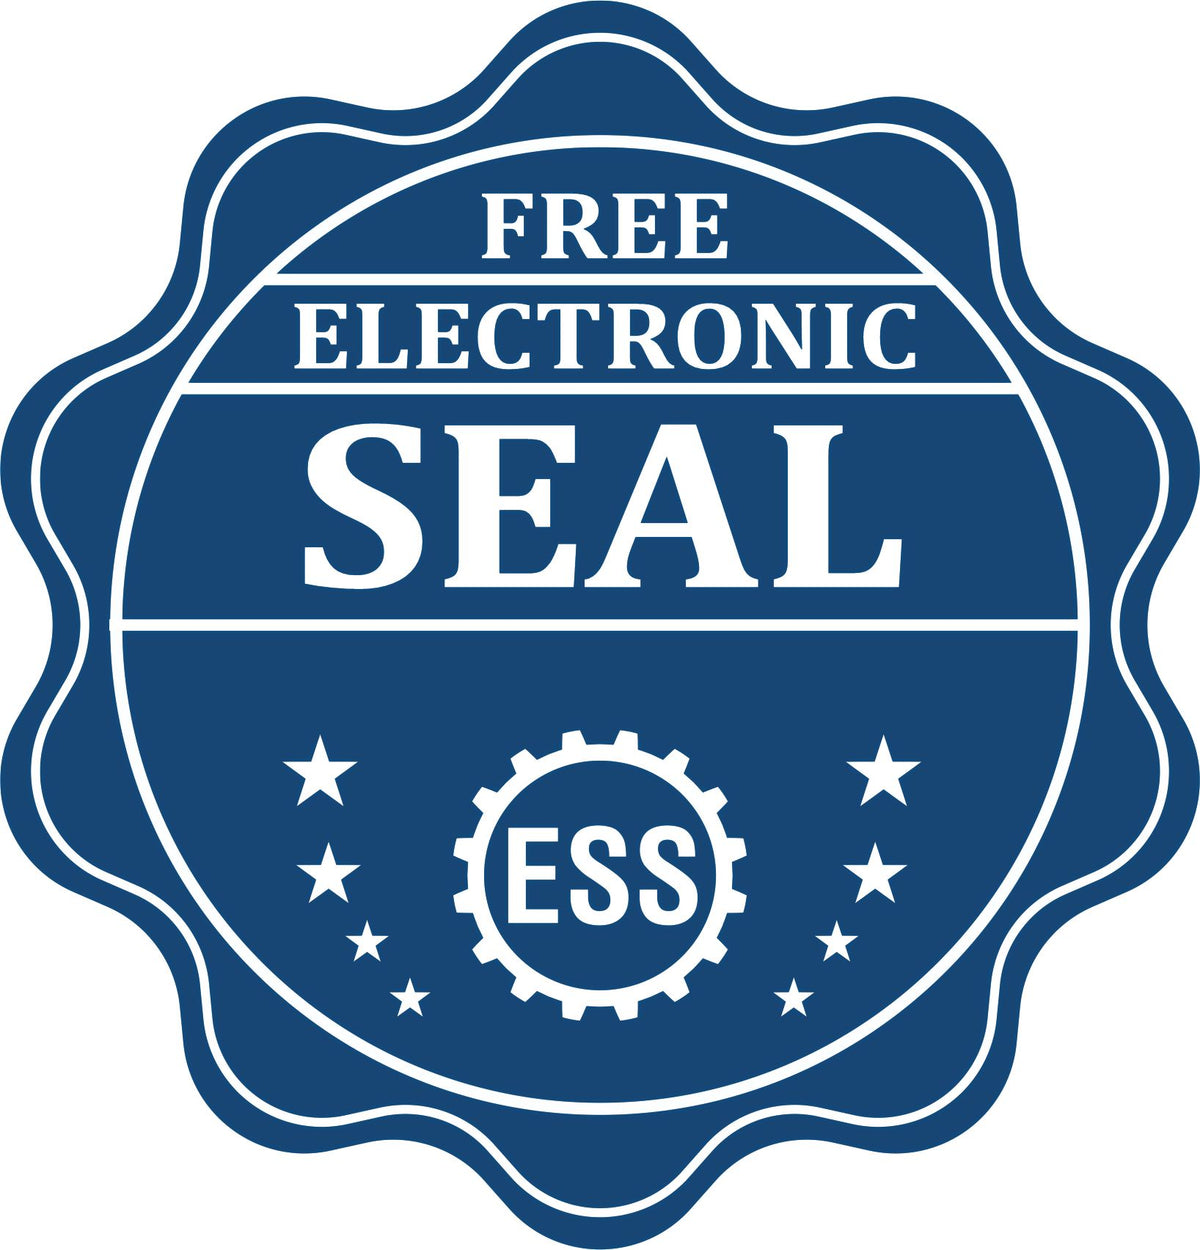 A badge showing a free electronic seal for the Hybrid Washington Landscape Architect Seal with stars and the ESS gear on the emblem.